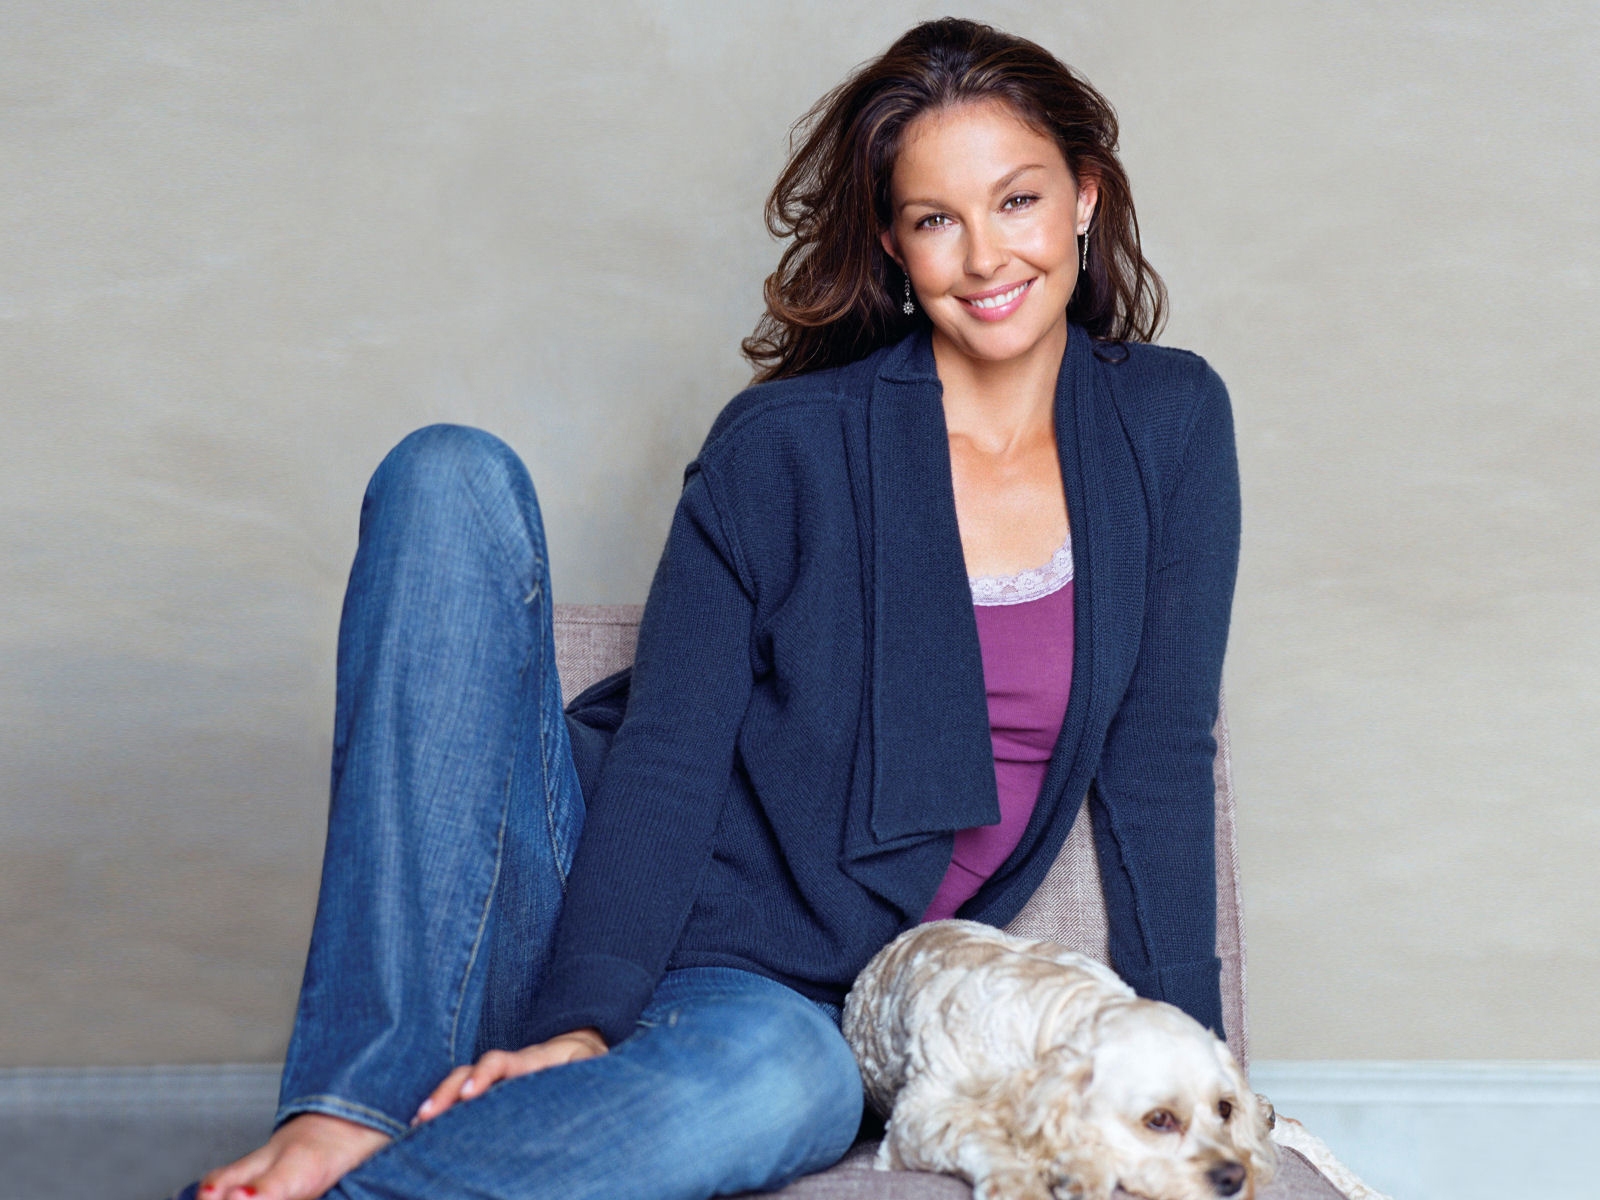 Ashley Judd Smile for 1600 x 1200 resolution